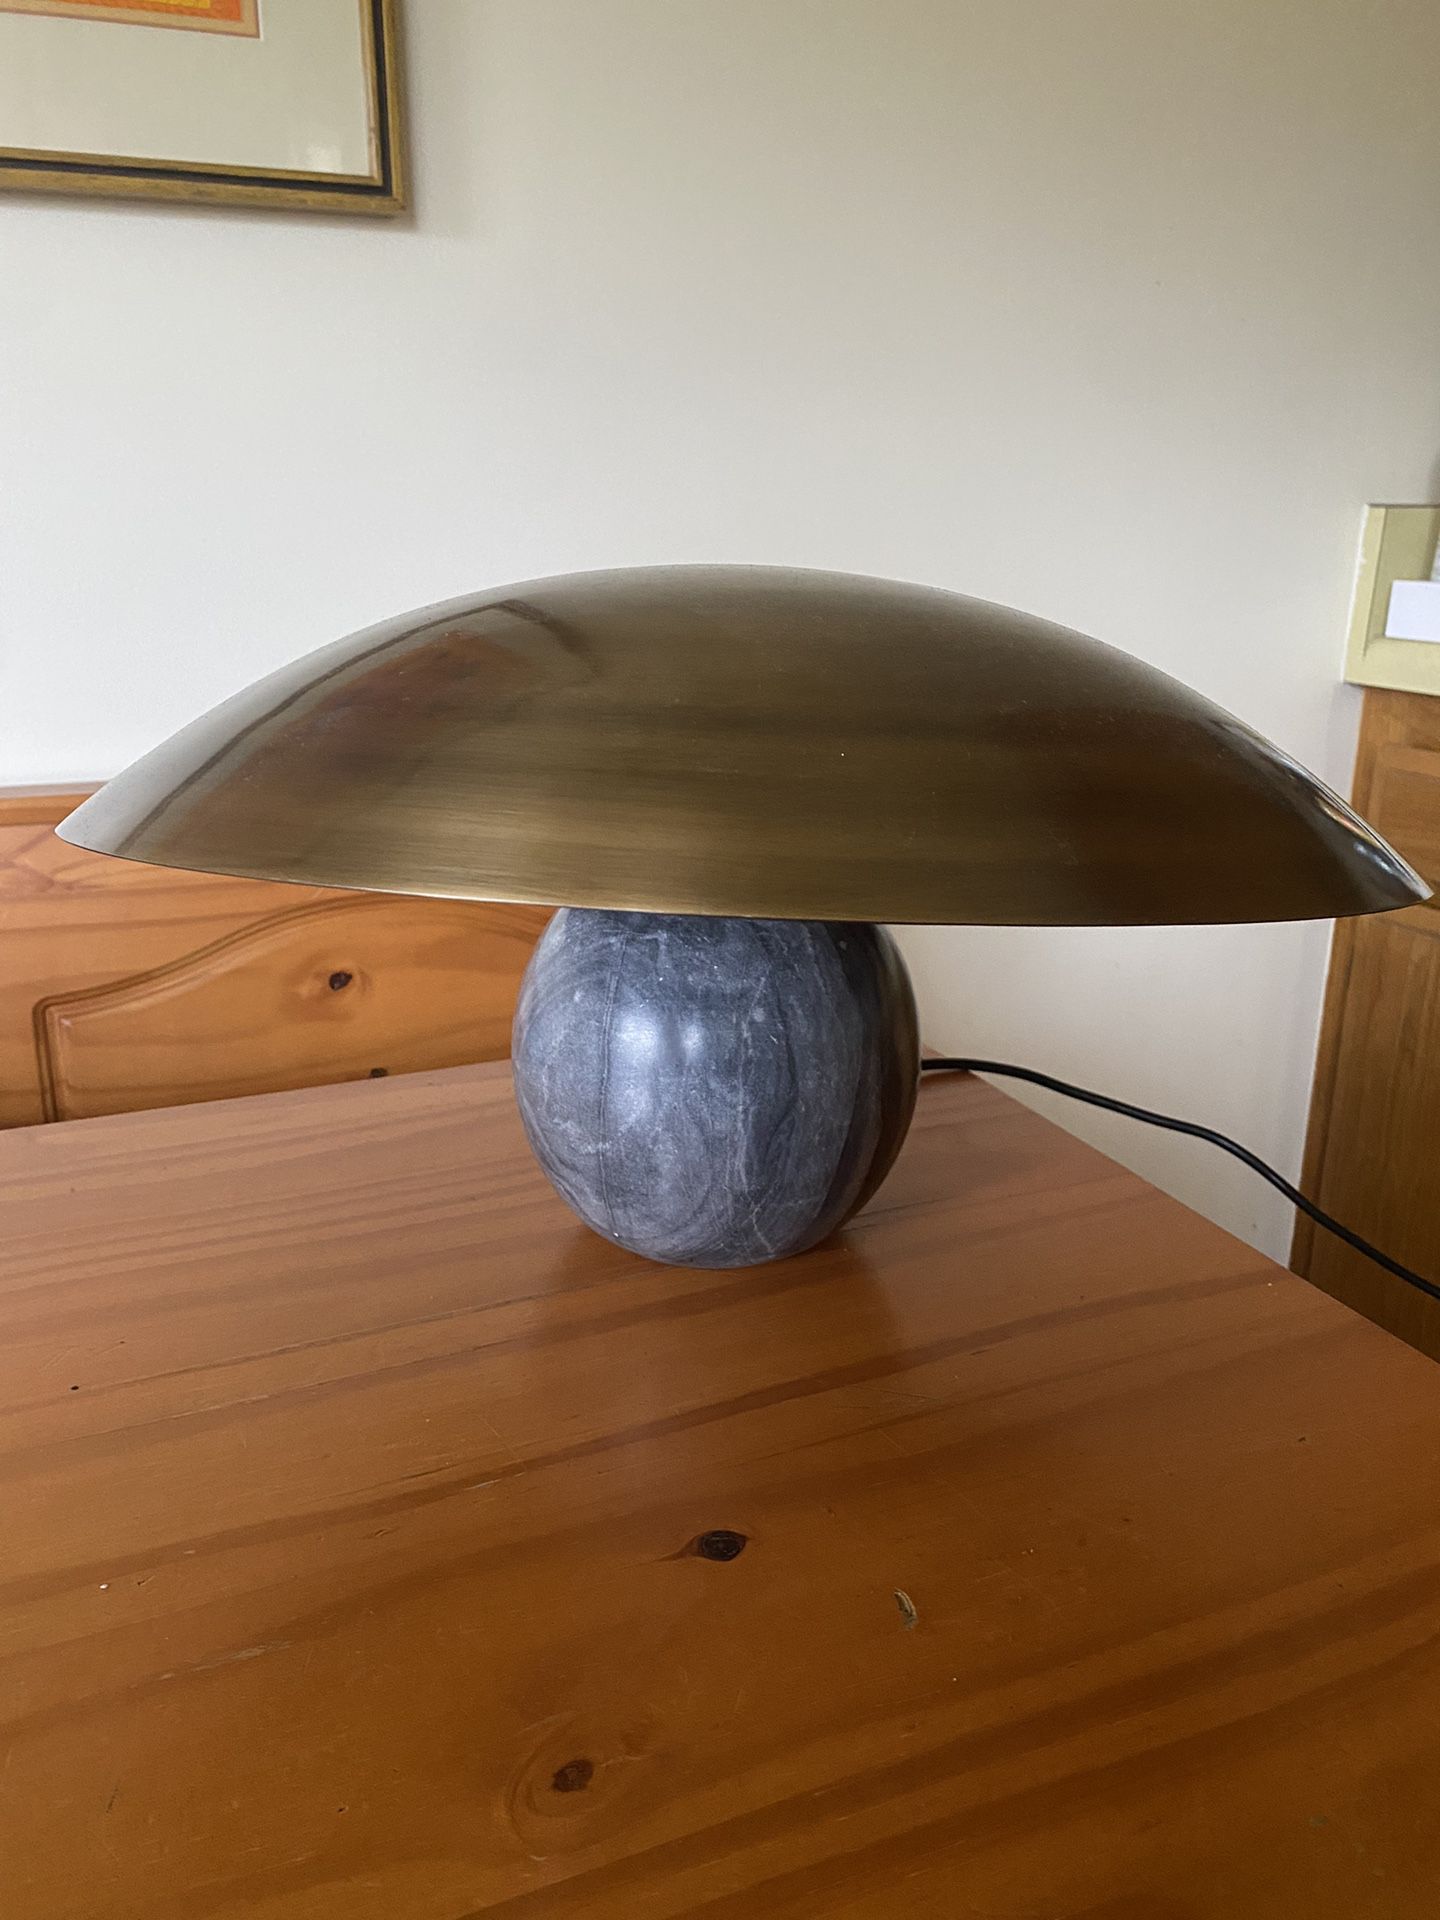 Crate and Barrel Formosa Stone Table Lamp for Sale in Pasadena, CA .